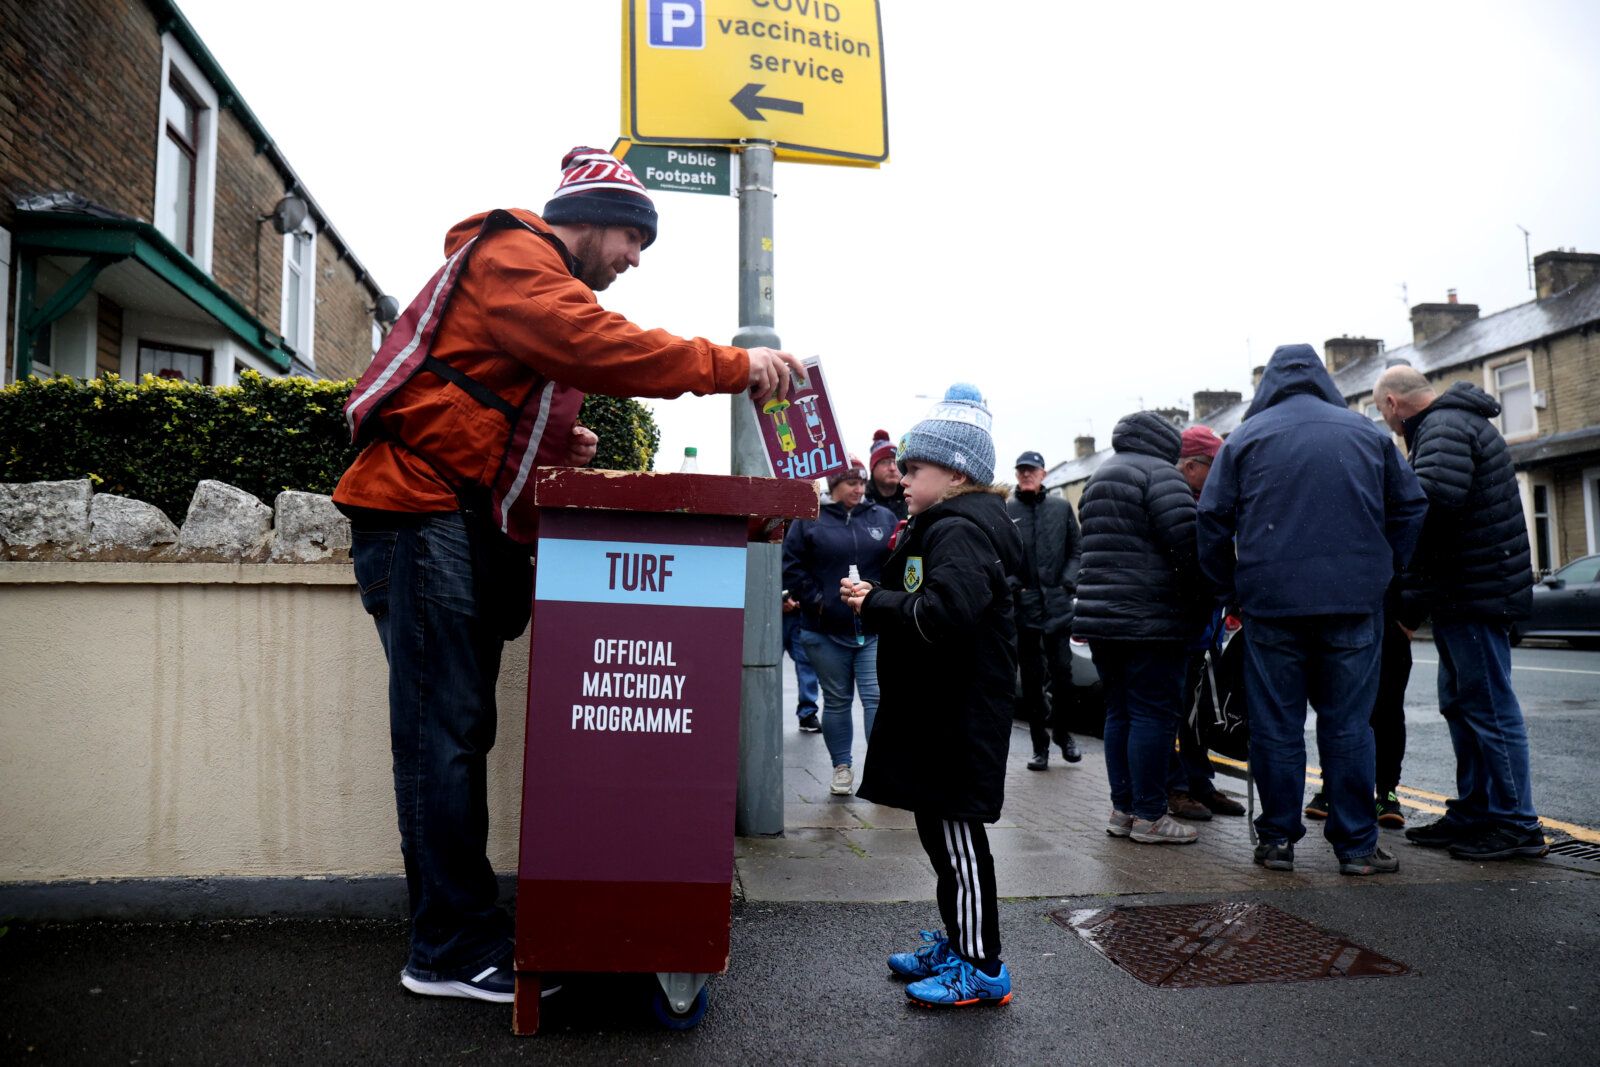 Soccer Football - Premier League - Burnley v Norwich City - Turf Moor, Burnley, Britain - October 2, 2021  Burnley fan buys a match day programme outside the stadium before the match Action Images via Reuters/Molly Darlington EDITORIAL USE ONLY. No use with unauthorized audio, video, data, fixture lists, club/league logos or 'live' services. Online in-match use limited to 75 images, no video emulation. No use in betting, games or single club /league/player publications.  Please contact your acco